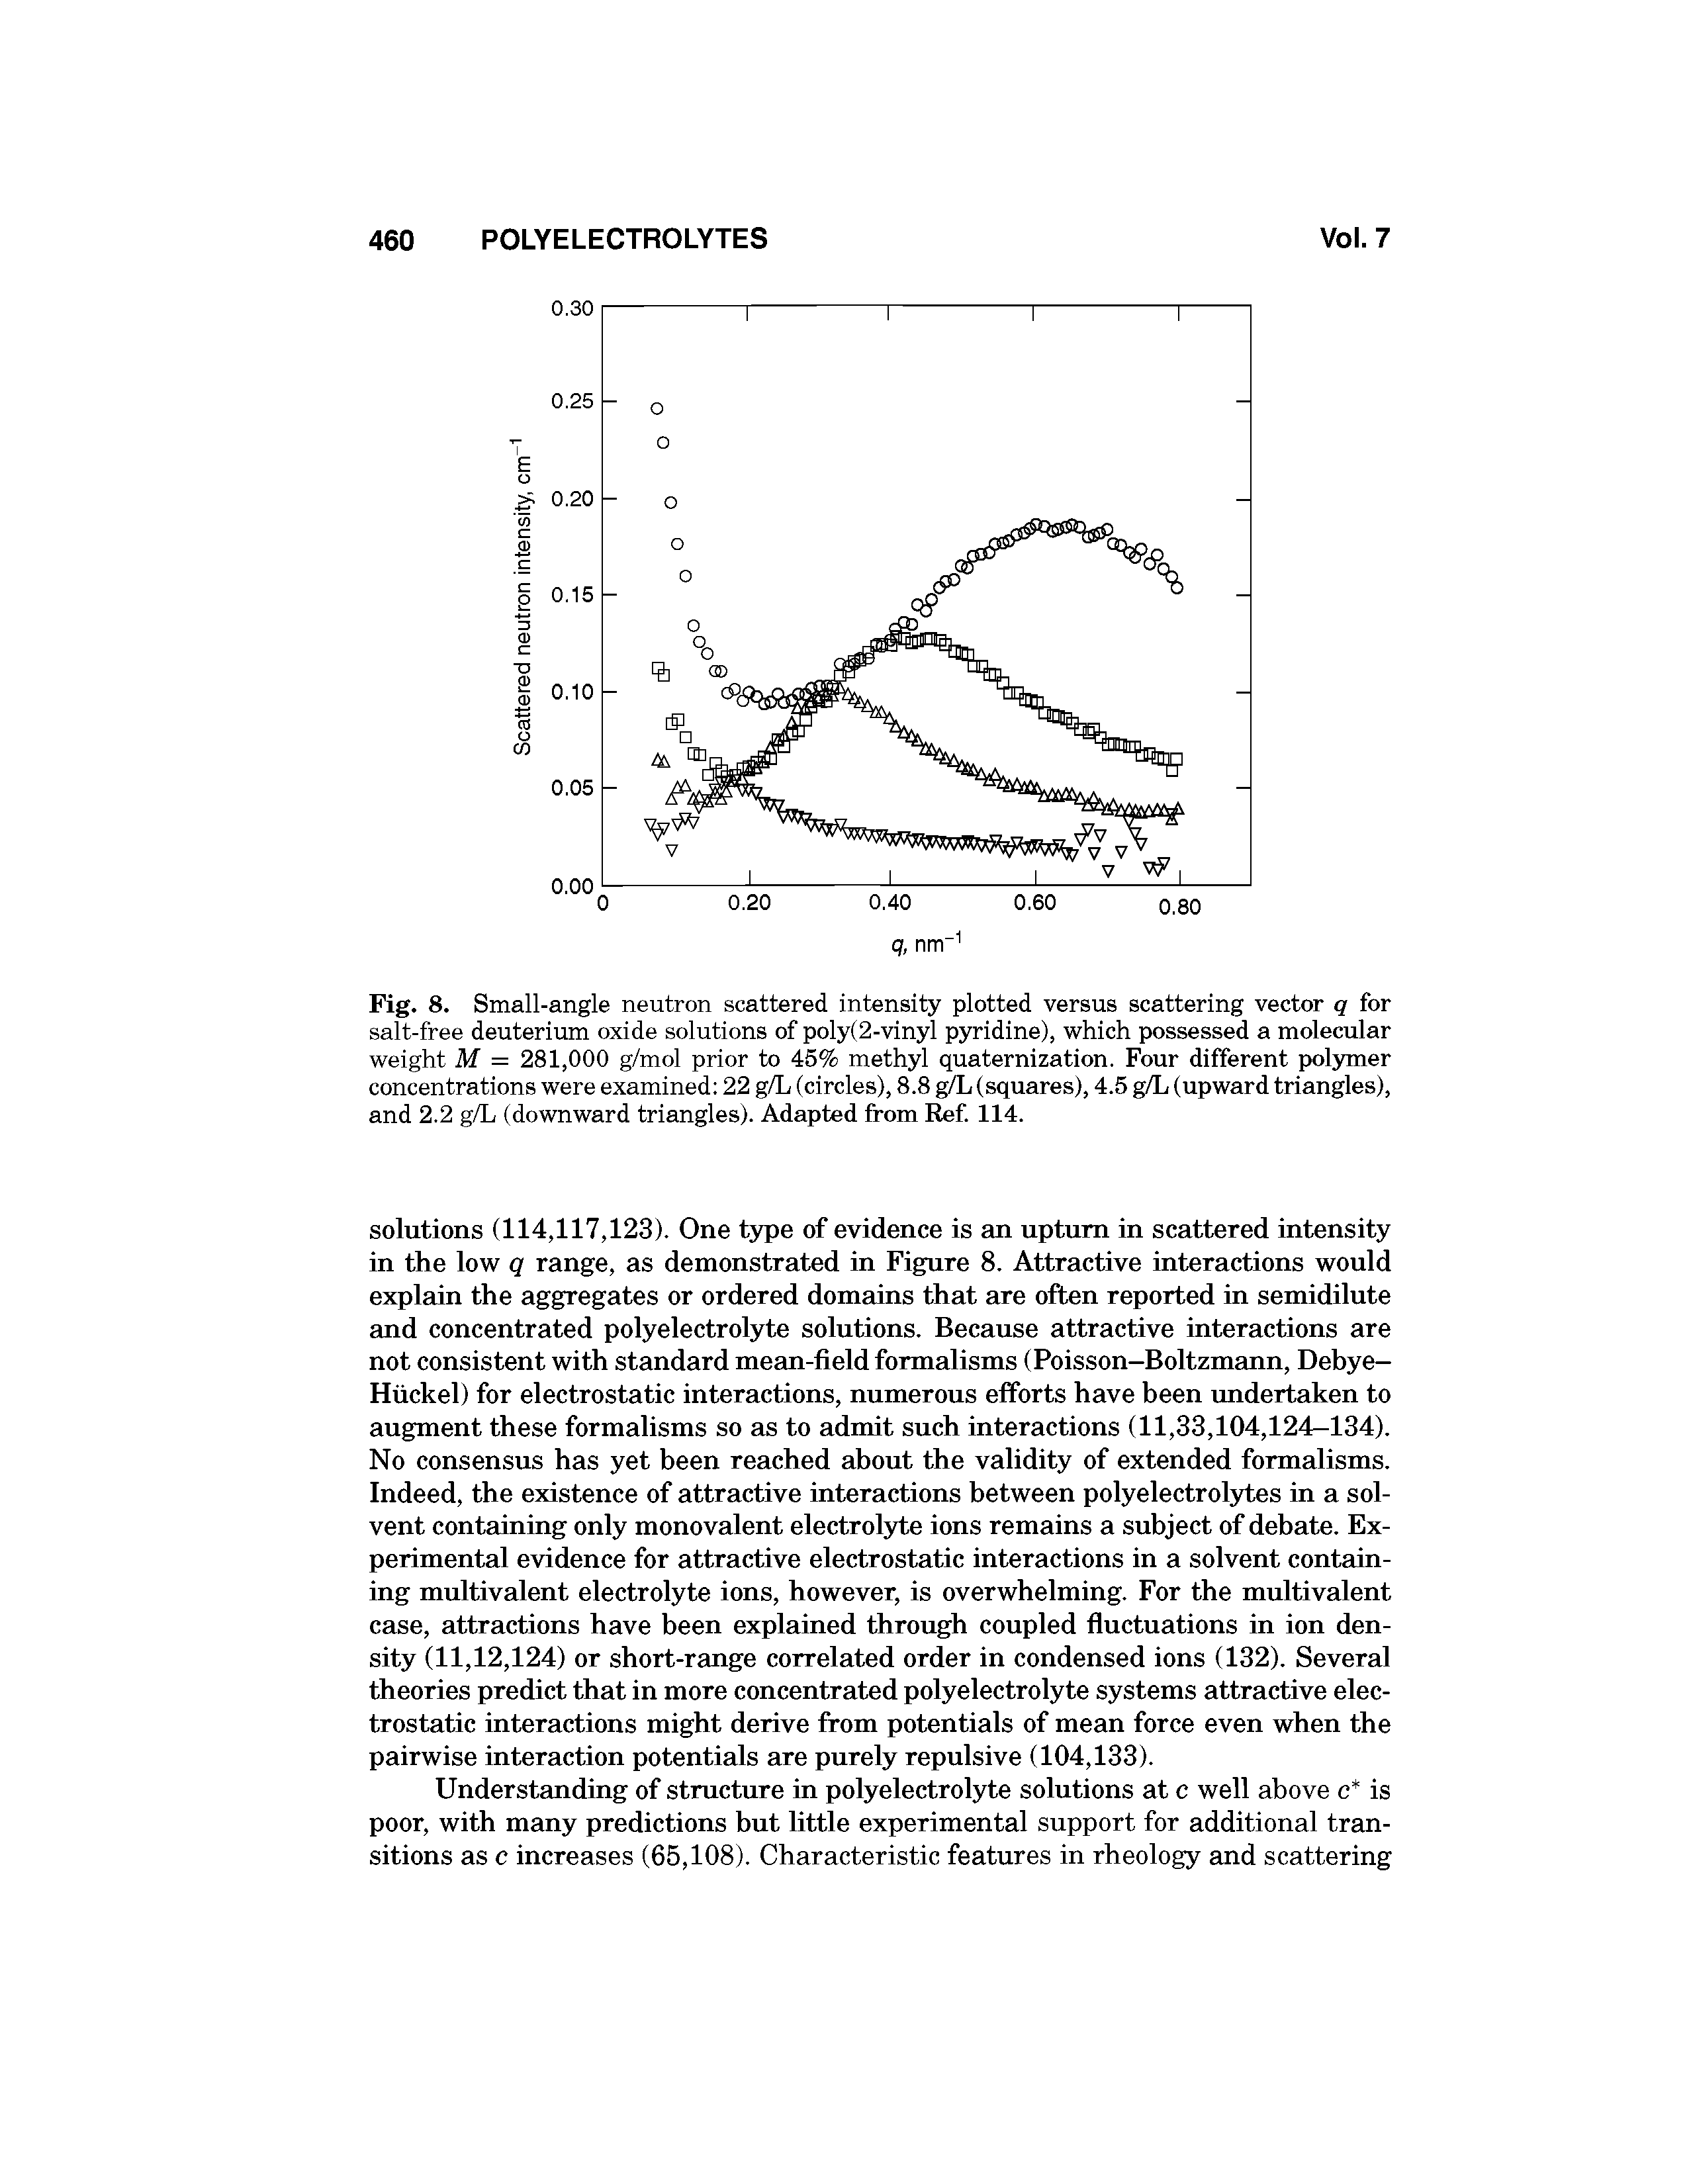 Fig. 8. Small-angle neutron scattered intensity plotted versus scattering vector q for salt-free deuterium oxide solutions of poly(2-vinyl pyridine), which possessed a molecular weight M = 281,000 g/mol prior to 45% methyl quaternization. Four different pol3mtier concentrations were examined 22 g/L (circles), 8.8 (squares), 4.5 g/L (upward triangles), and 2.2 g/L (downward triangles). Adapted from Ref 114.